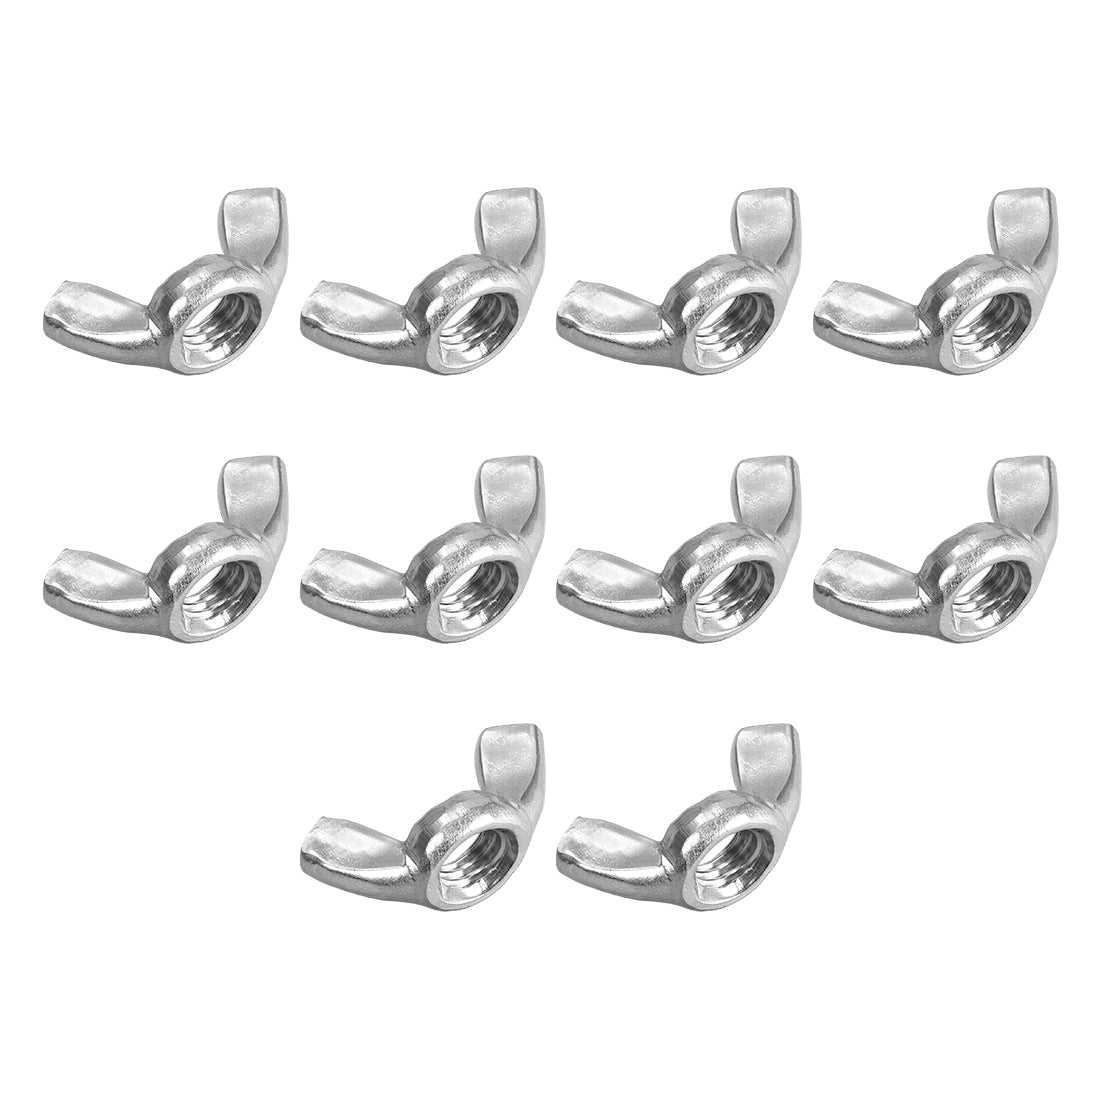 uxcell Uxcell Metric Wing Nuts, Carbon Steel Zinc Plated Hand Twist Tighten Ear Butterfly Nut, 10 Pcs